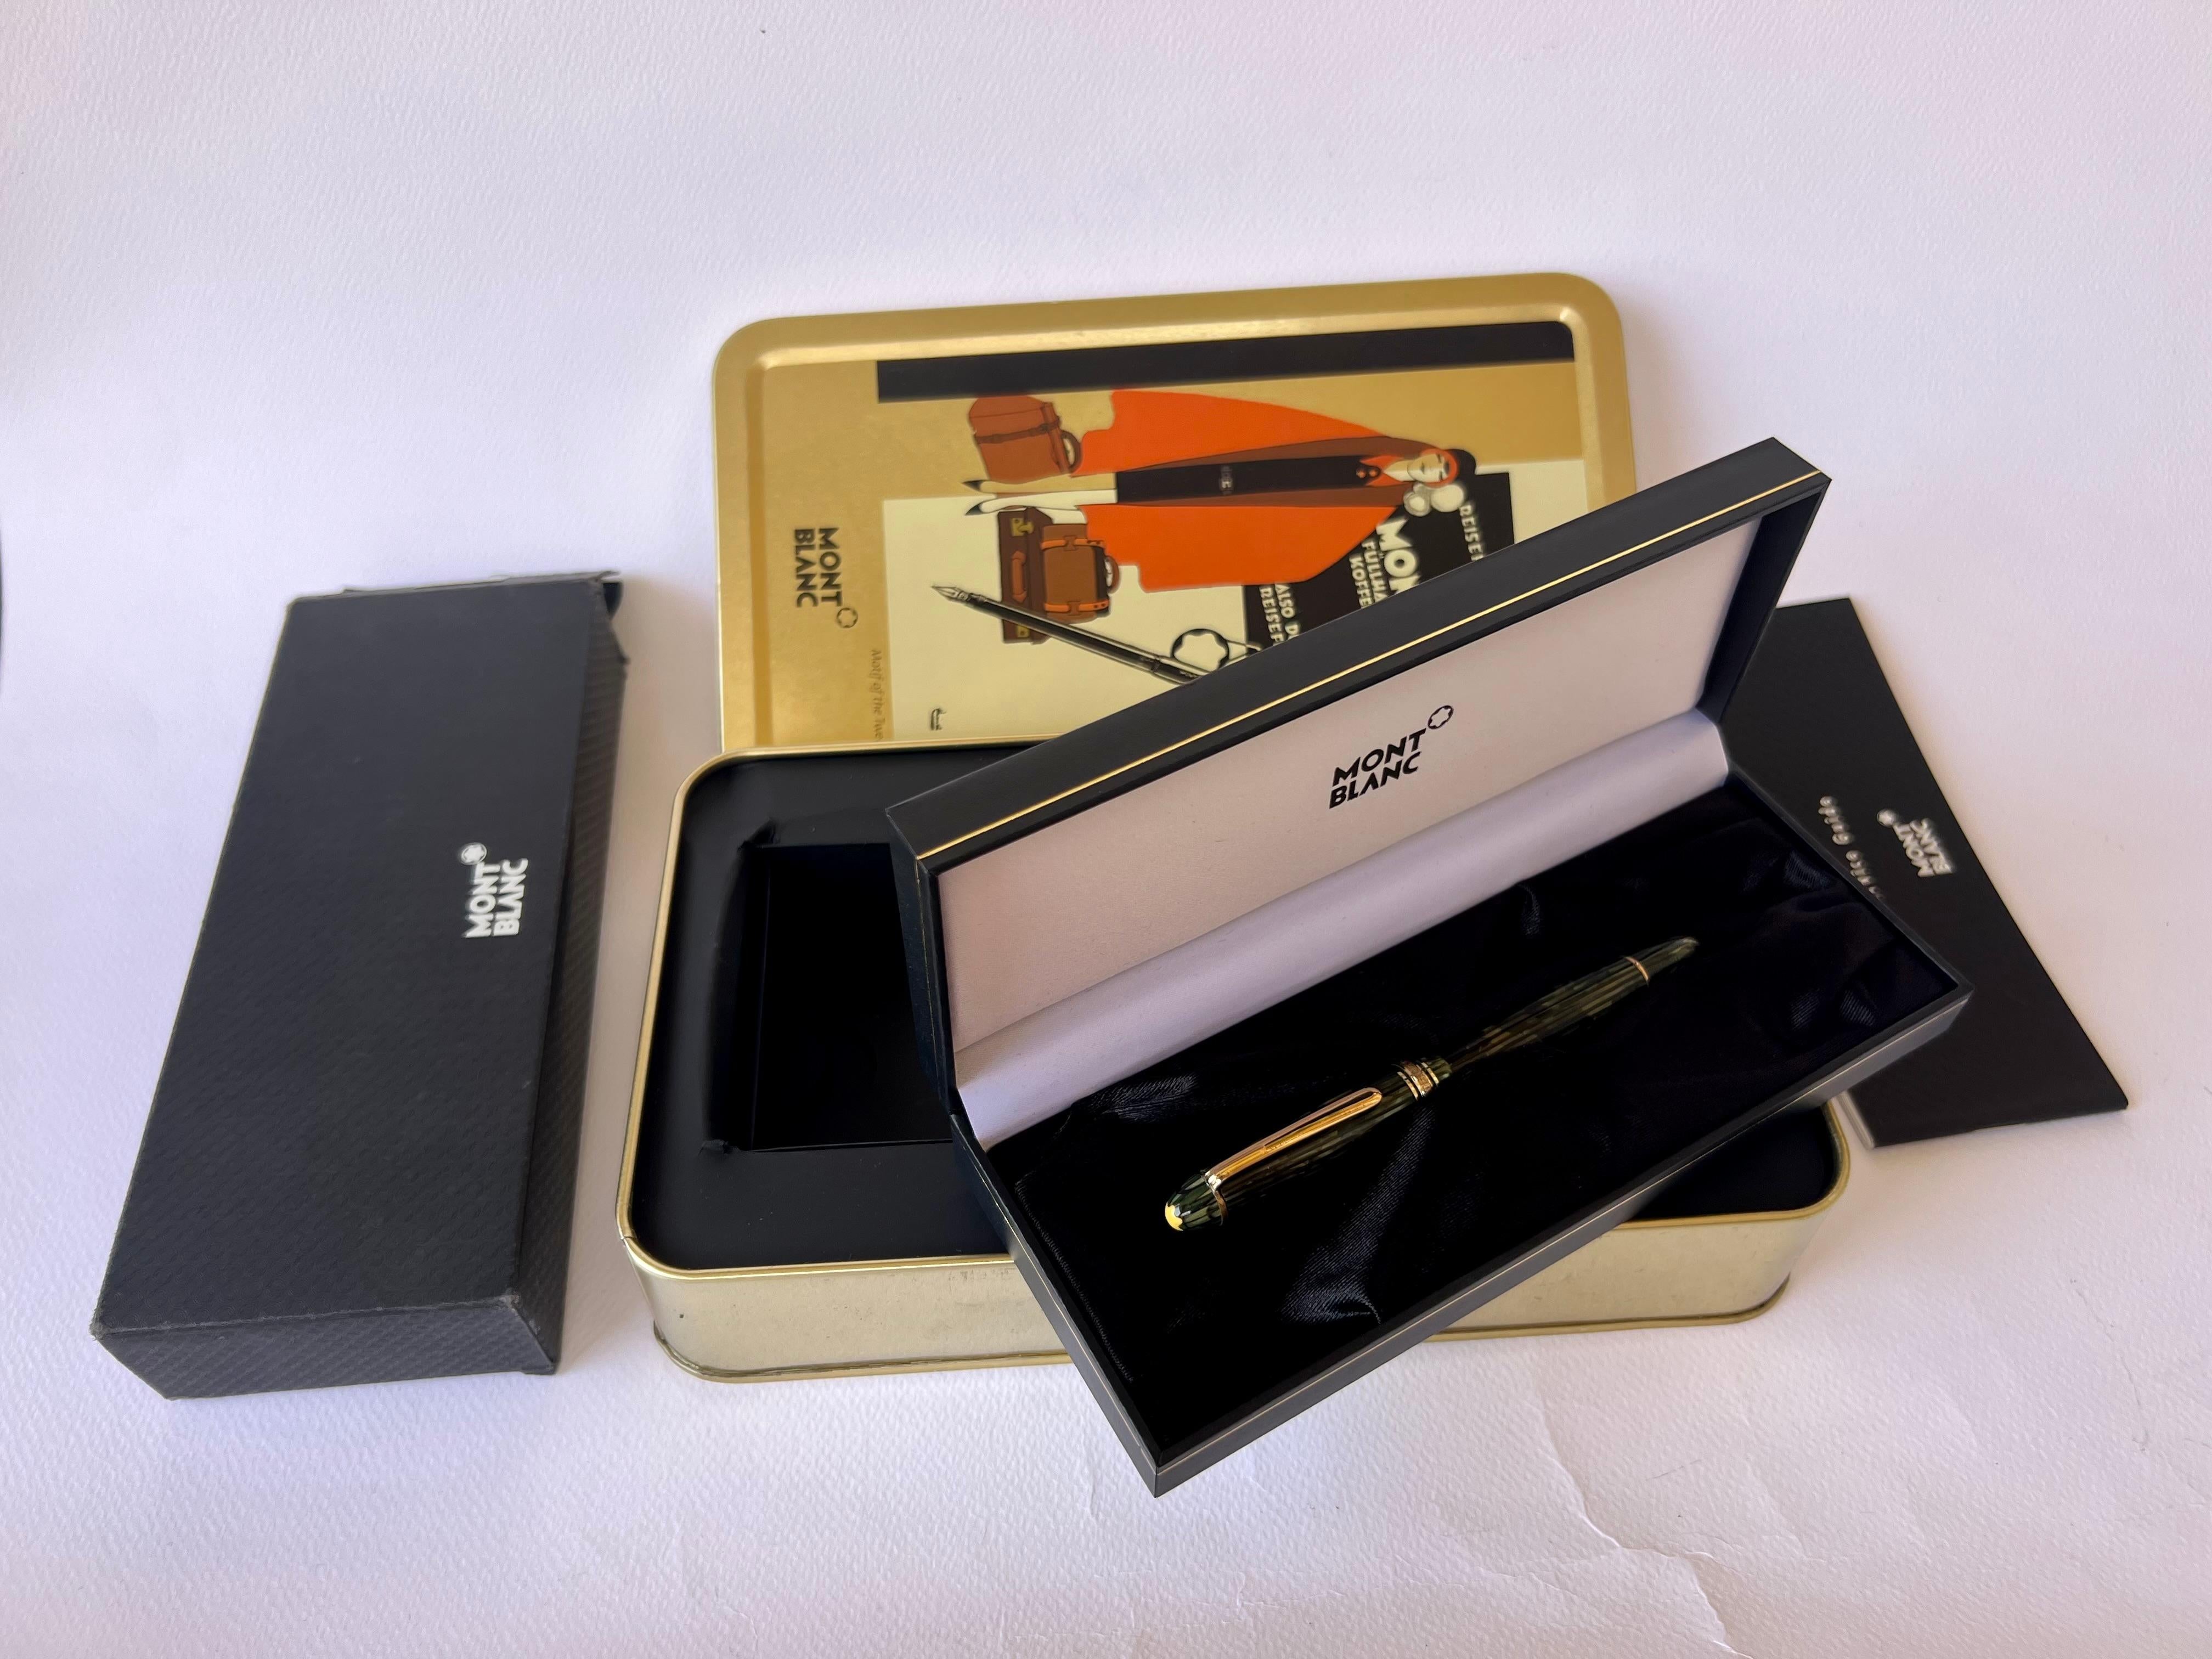 Rare and Excellent Montblanc Masterpiece 144G with very good color, no cracks or dents

Comes In Genuine box. ALL IN EXCELLENT CONDITION. SEE IMAGES
Details:

Condition : Appear to be Not used or lightly used with barely any wear or Scratches Please